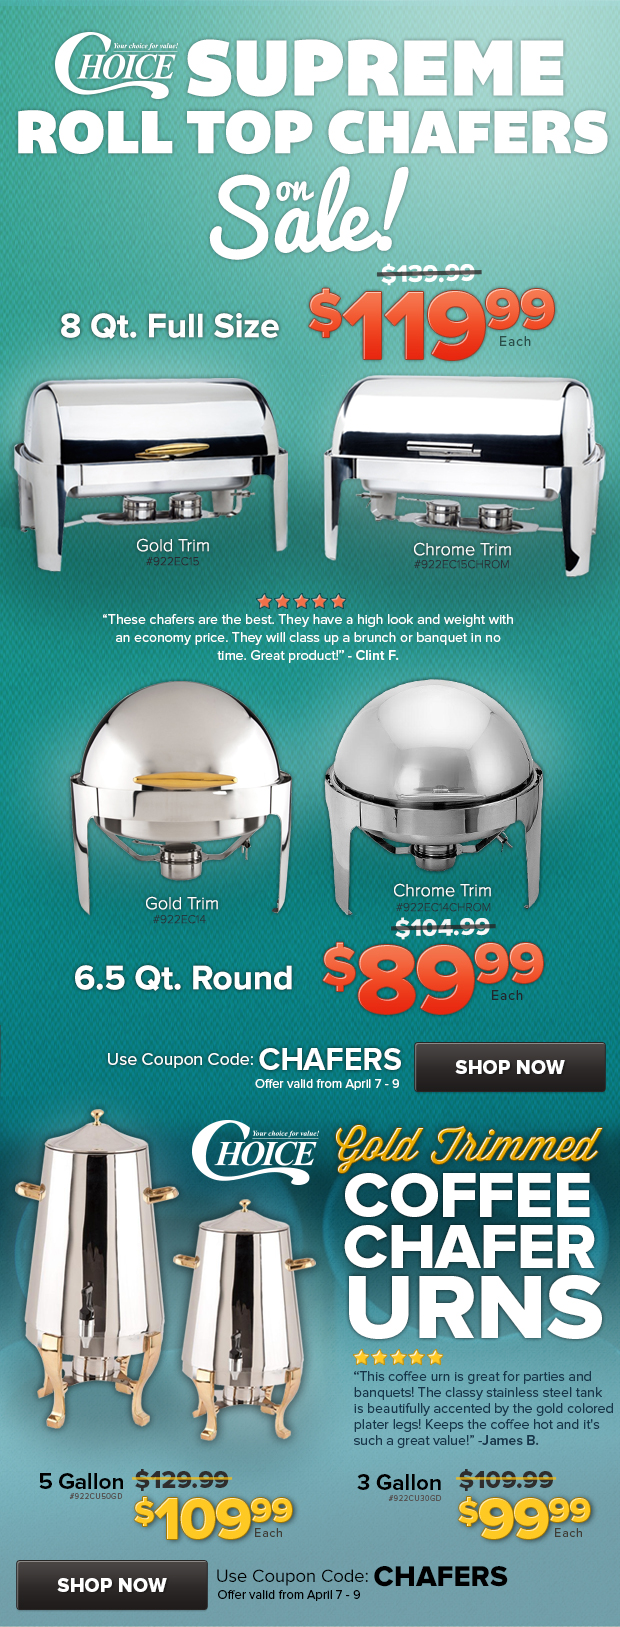 Choice Rolltop Chafers and Coffe Chafer Urns on Sale!